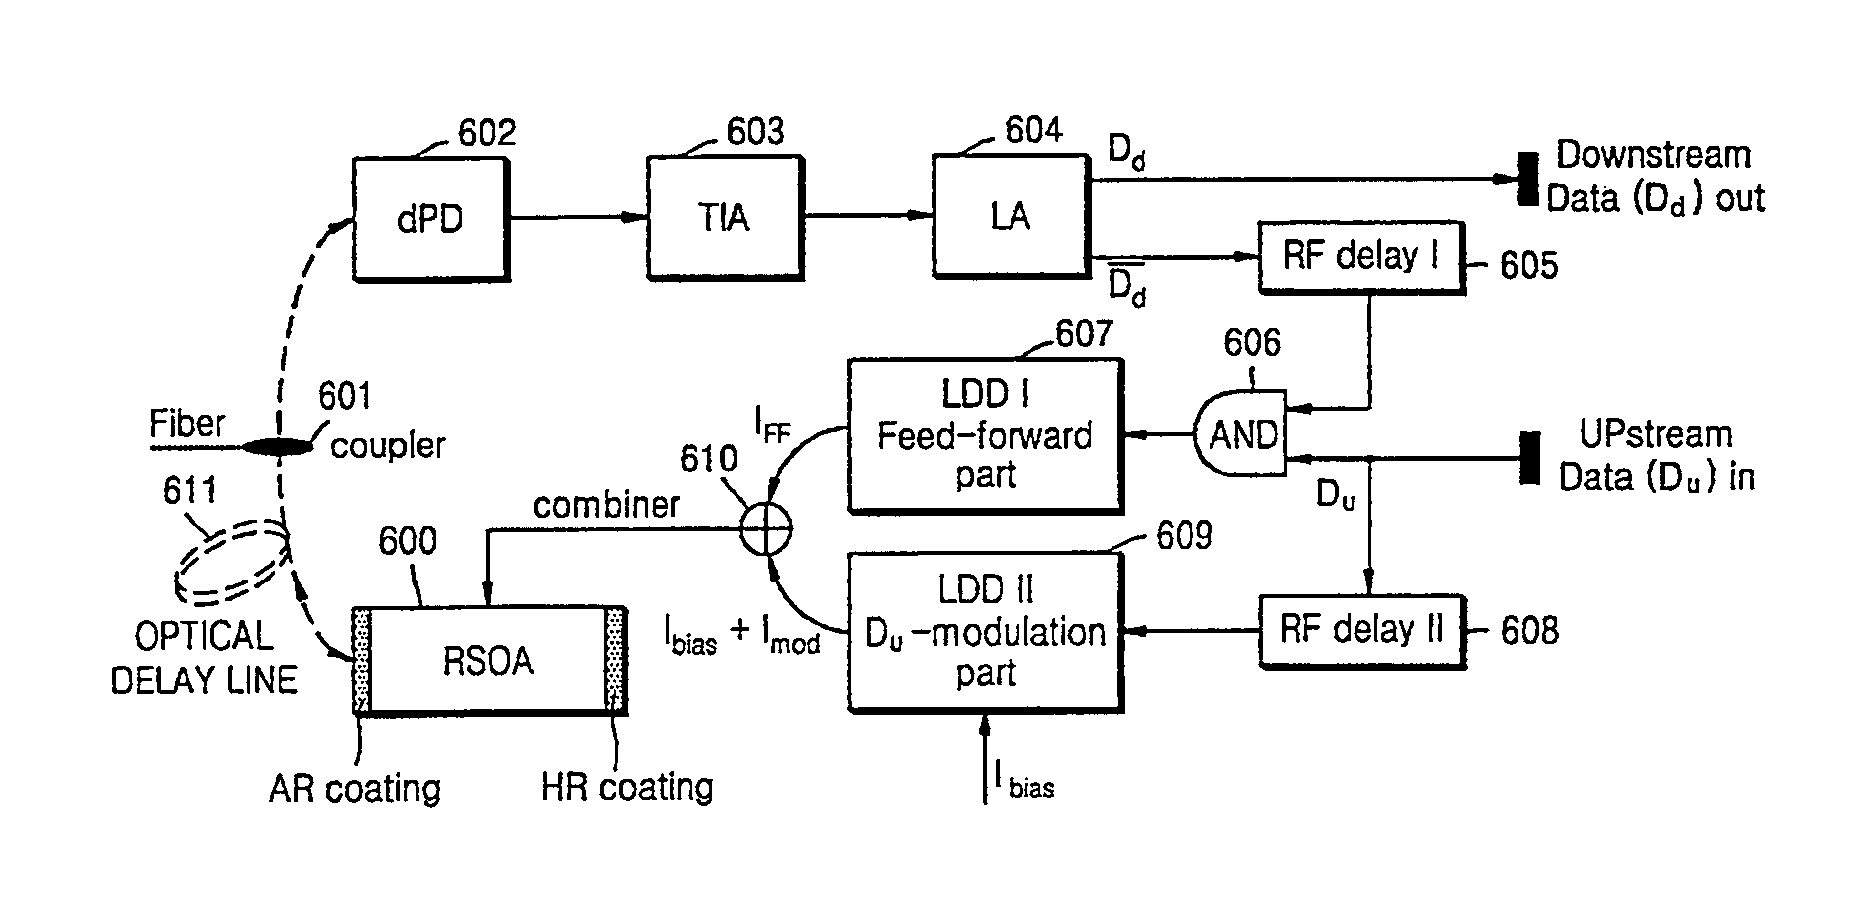 Apparatus and method for OLT and ONU for wavelength agnostic wavelength-division multiplexed passive optical networks